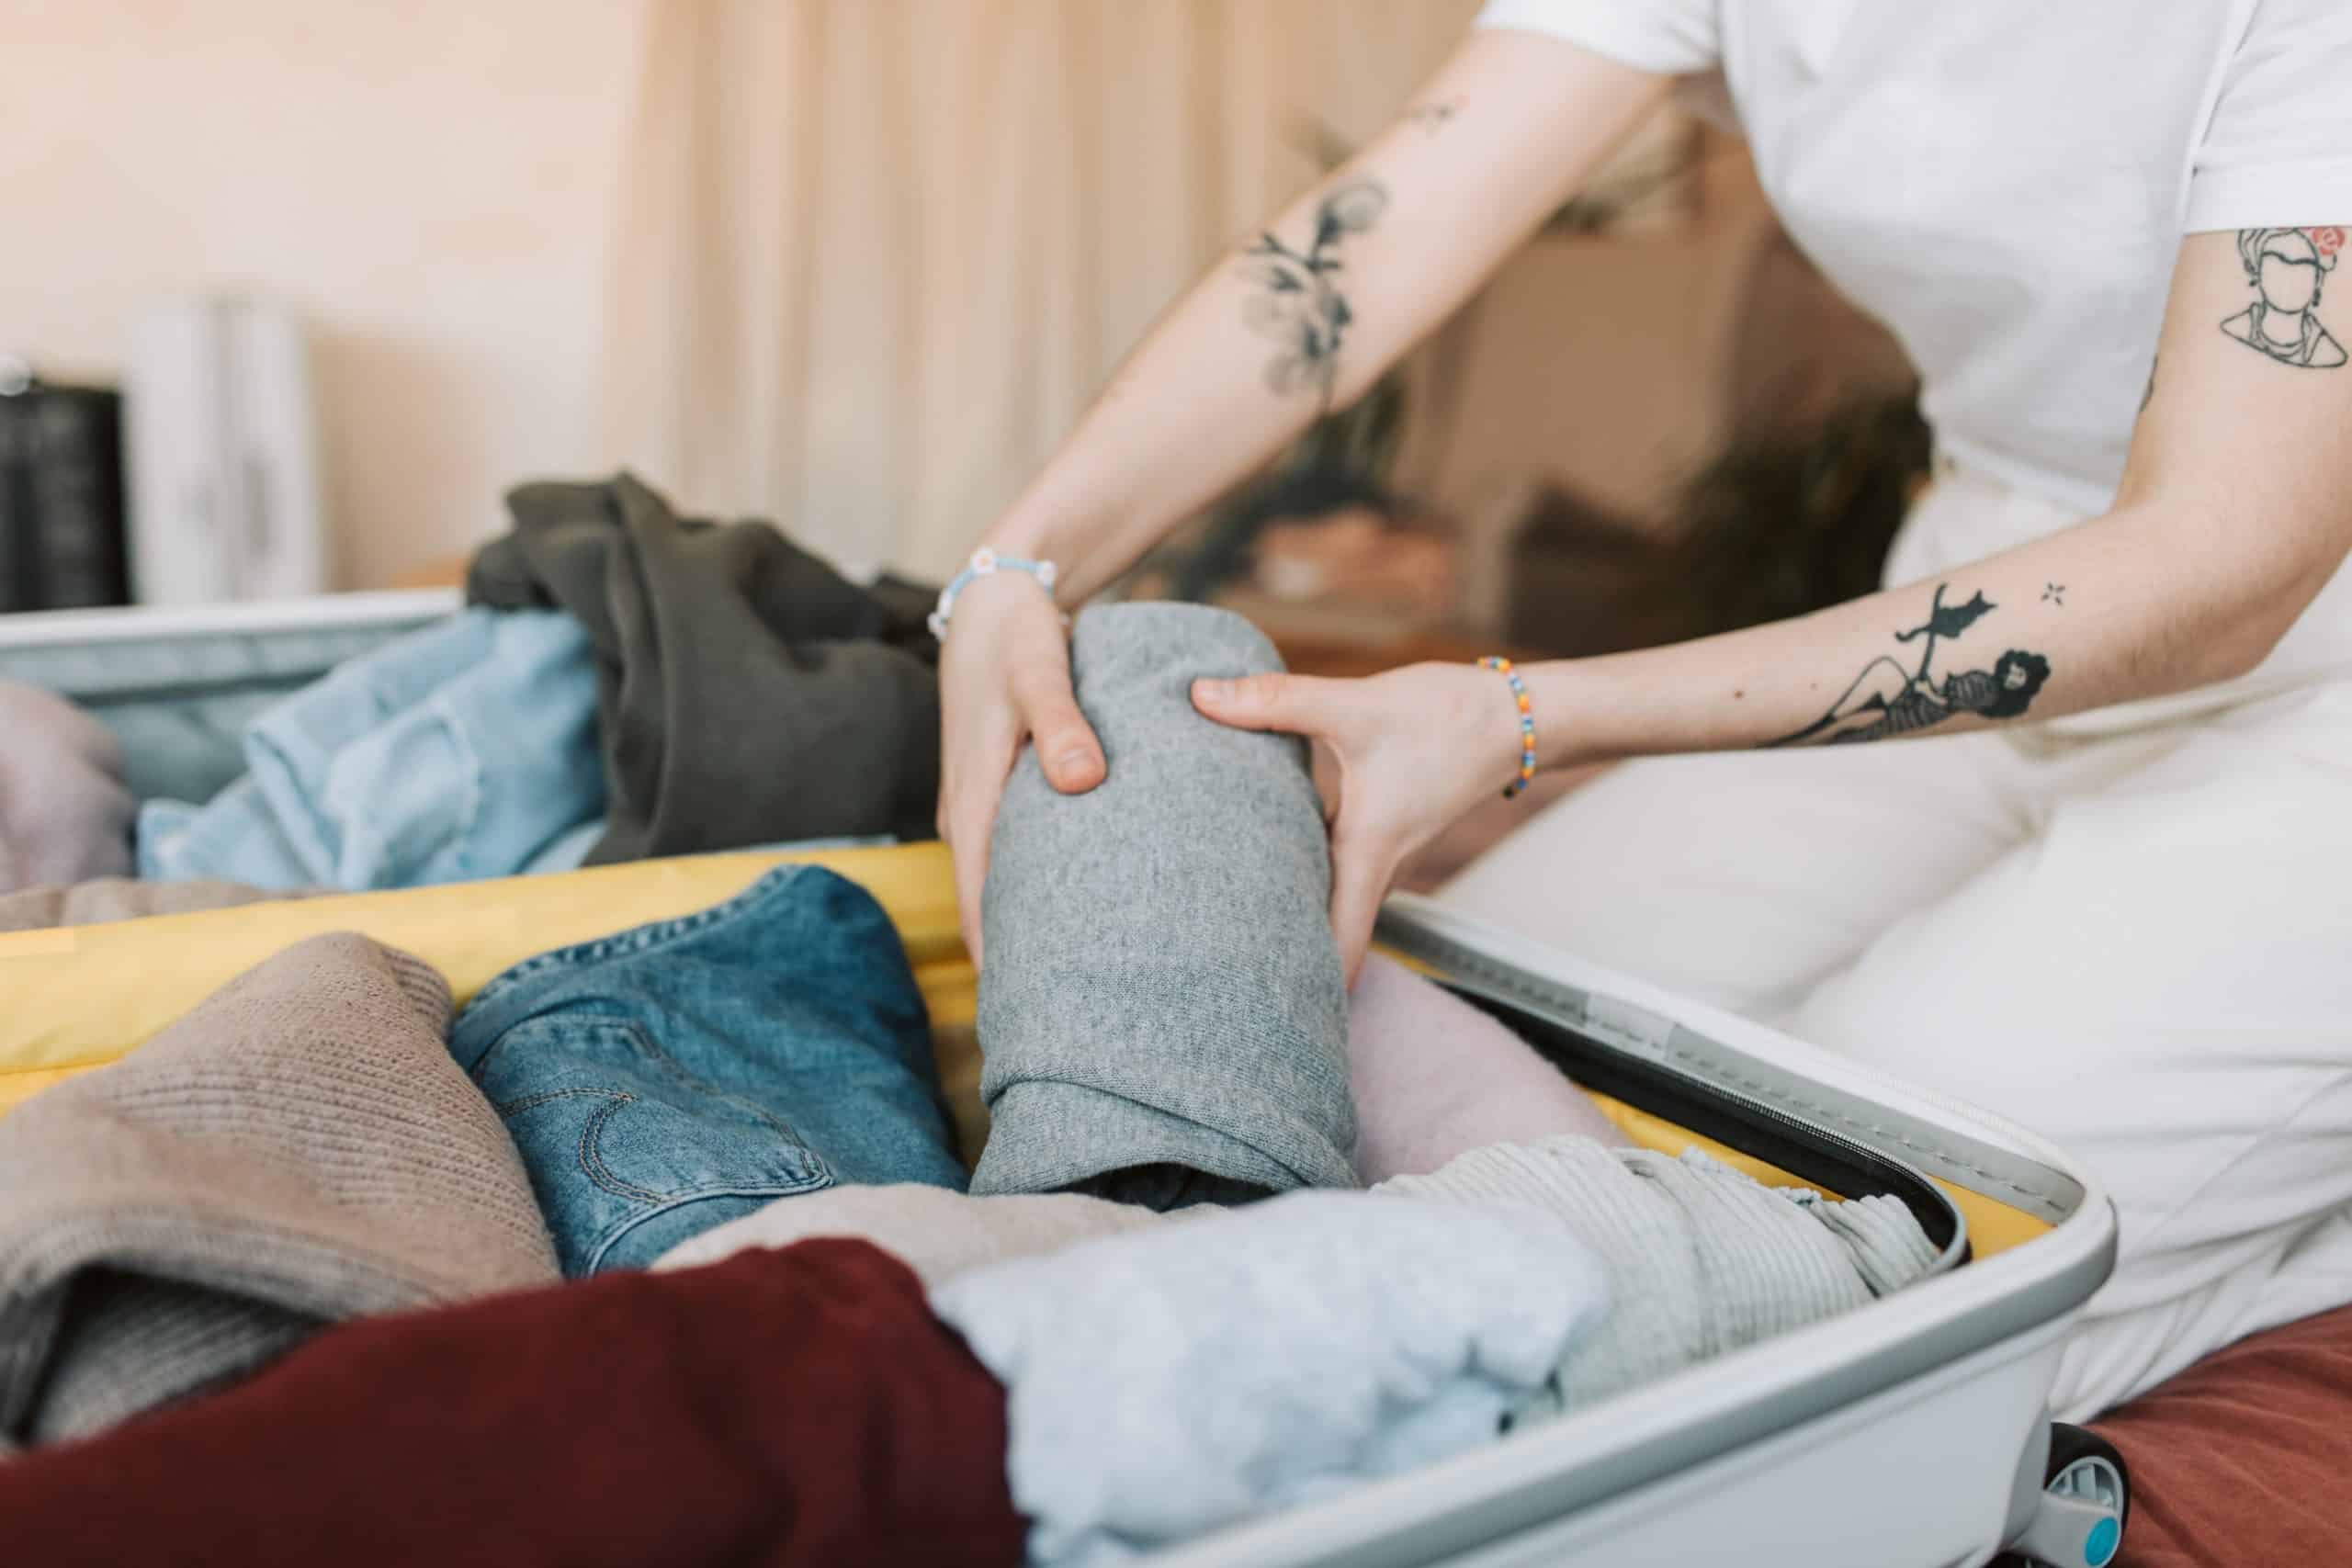 Person with tattoos packs clothes into a suitcase.